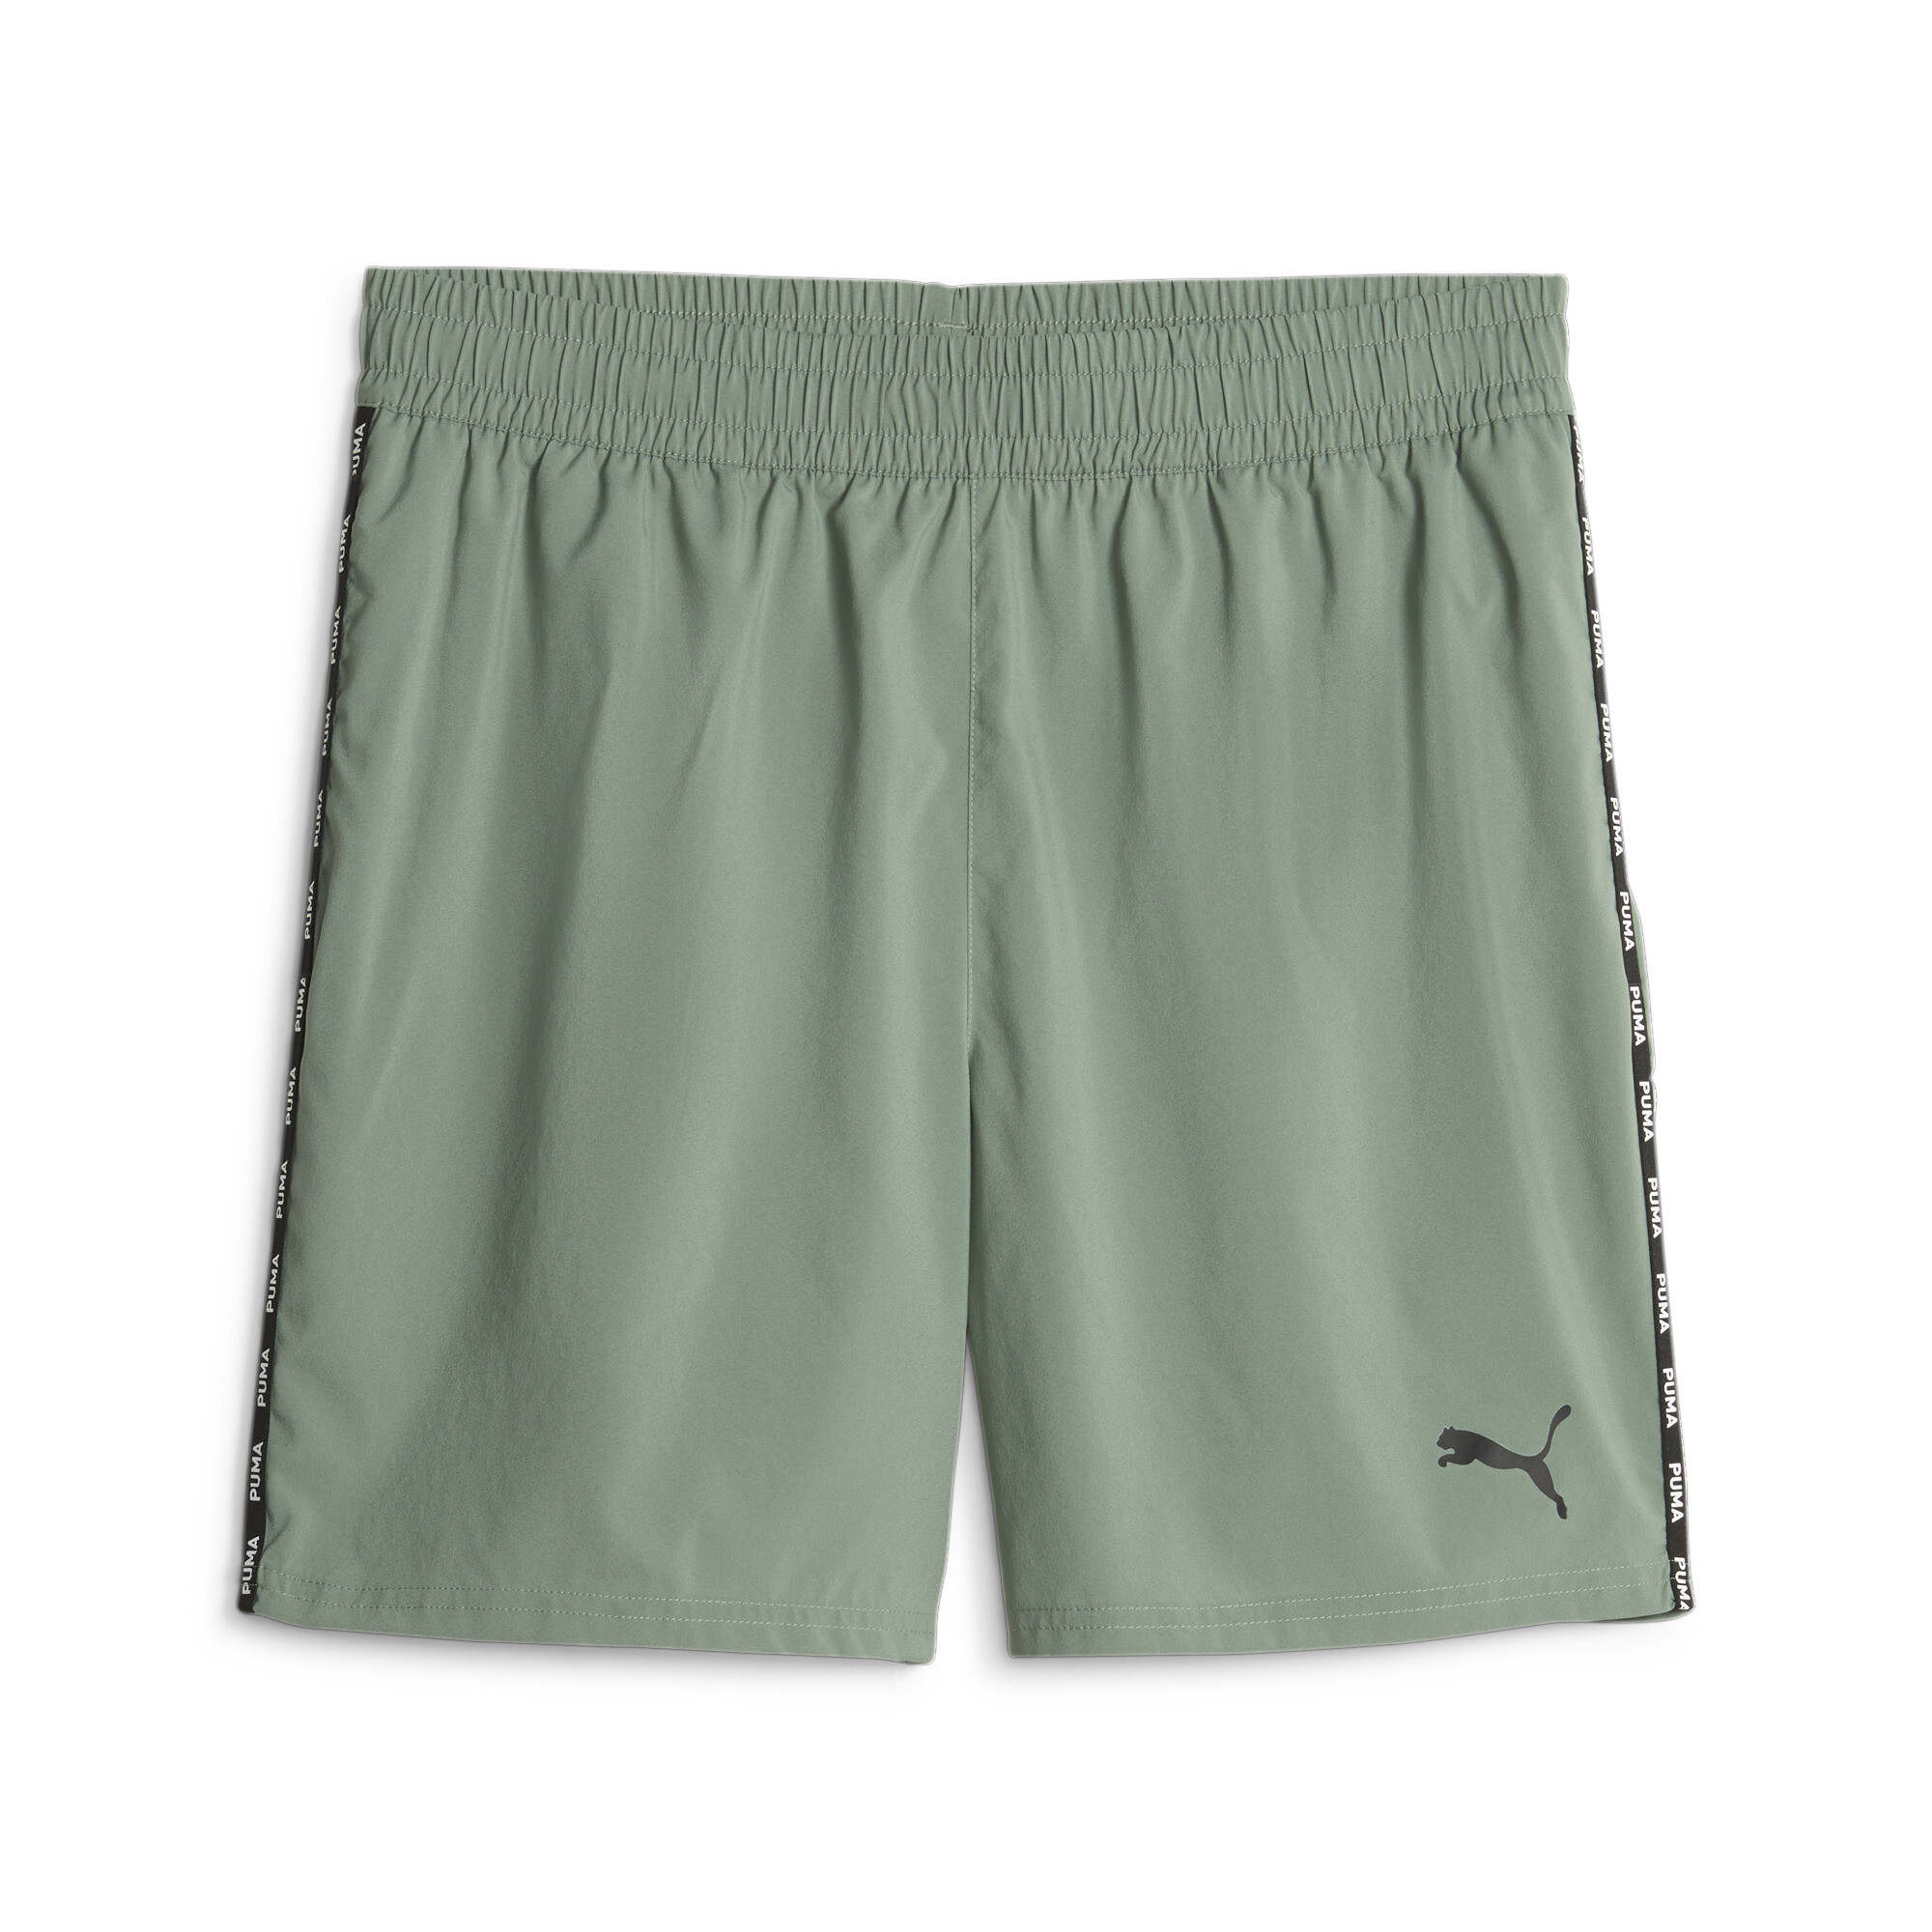 Men's PUMA Fit 7 Training Shorts In Green, Size Large